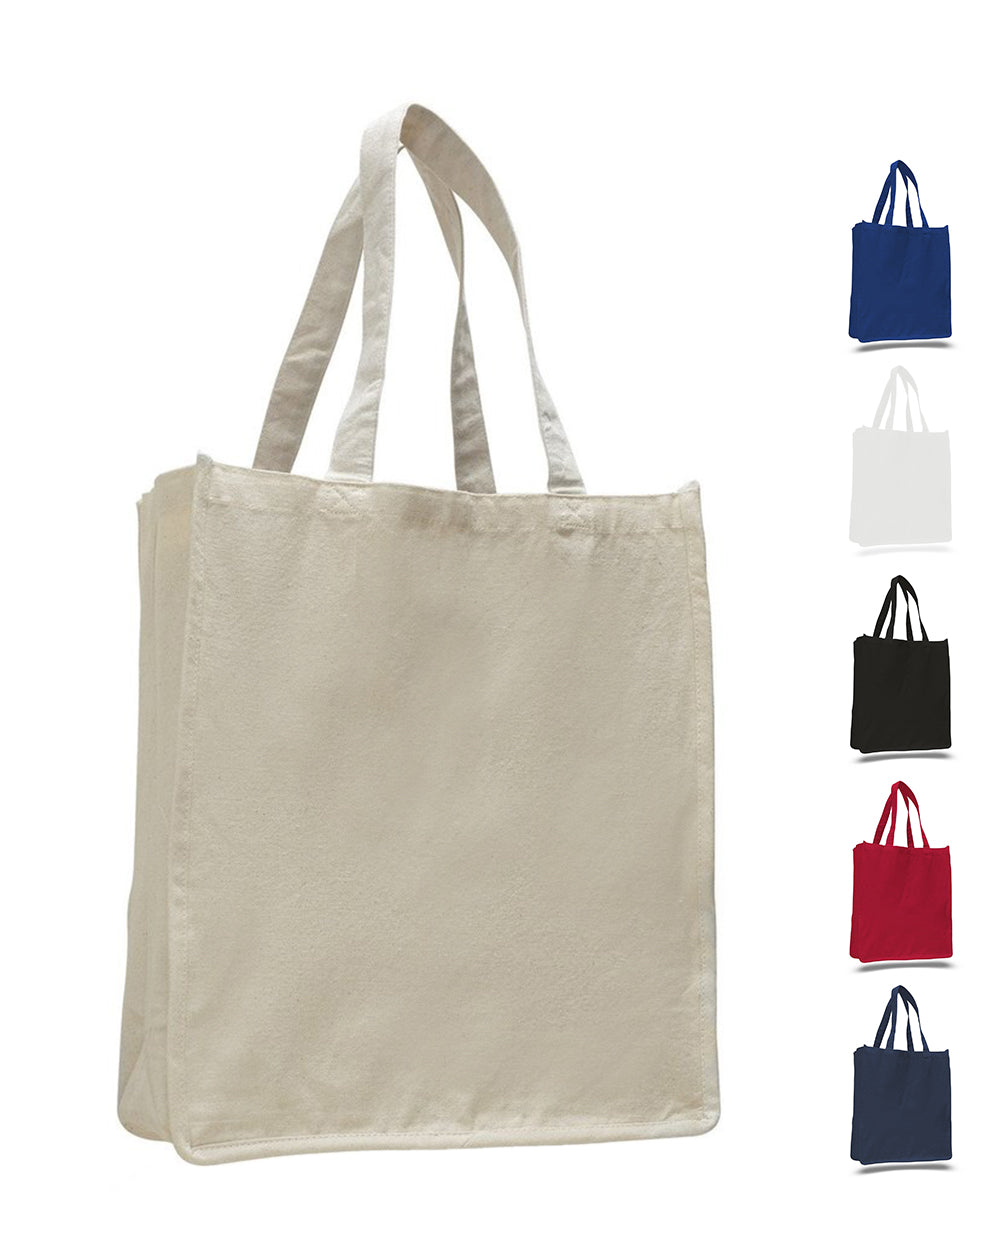 Apply 100 coupon - Vantagekart Blue Cotton Plain Tote Shopping Bags with  Extra Strong 13